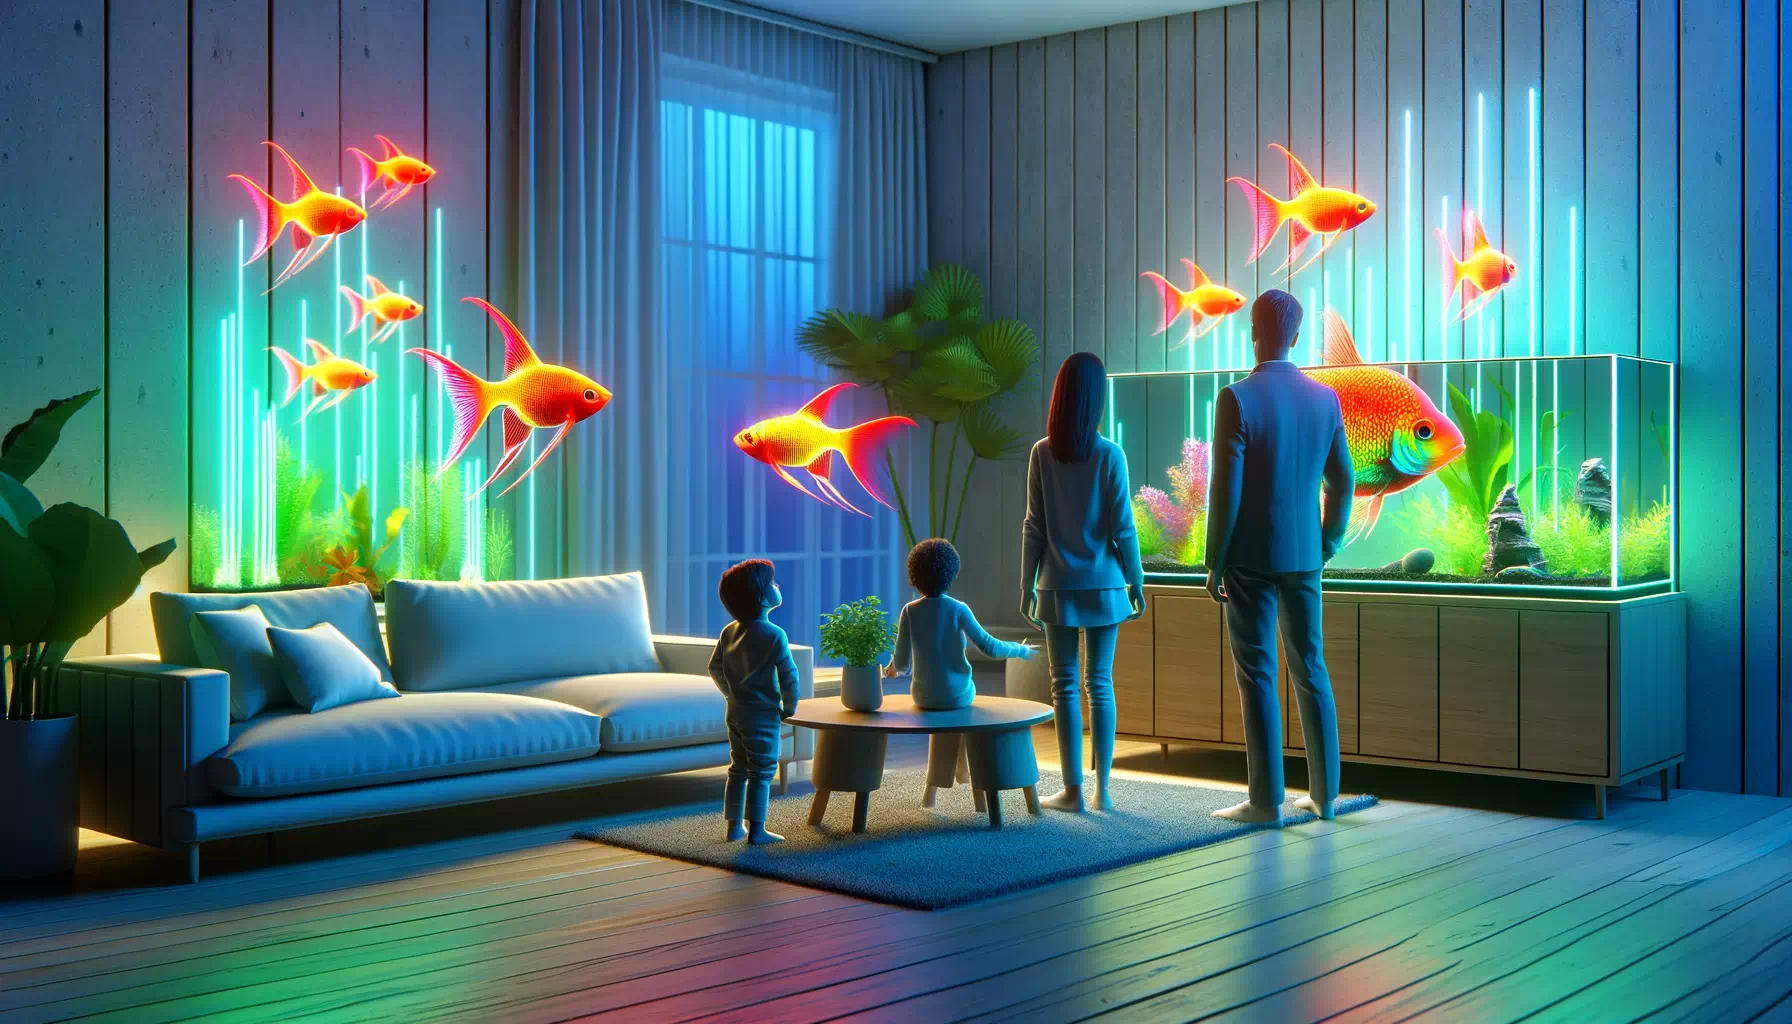 showing the impact of GloFish on the aquarium industry and consumer trends. The scene should depict a modern home setting wit